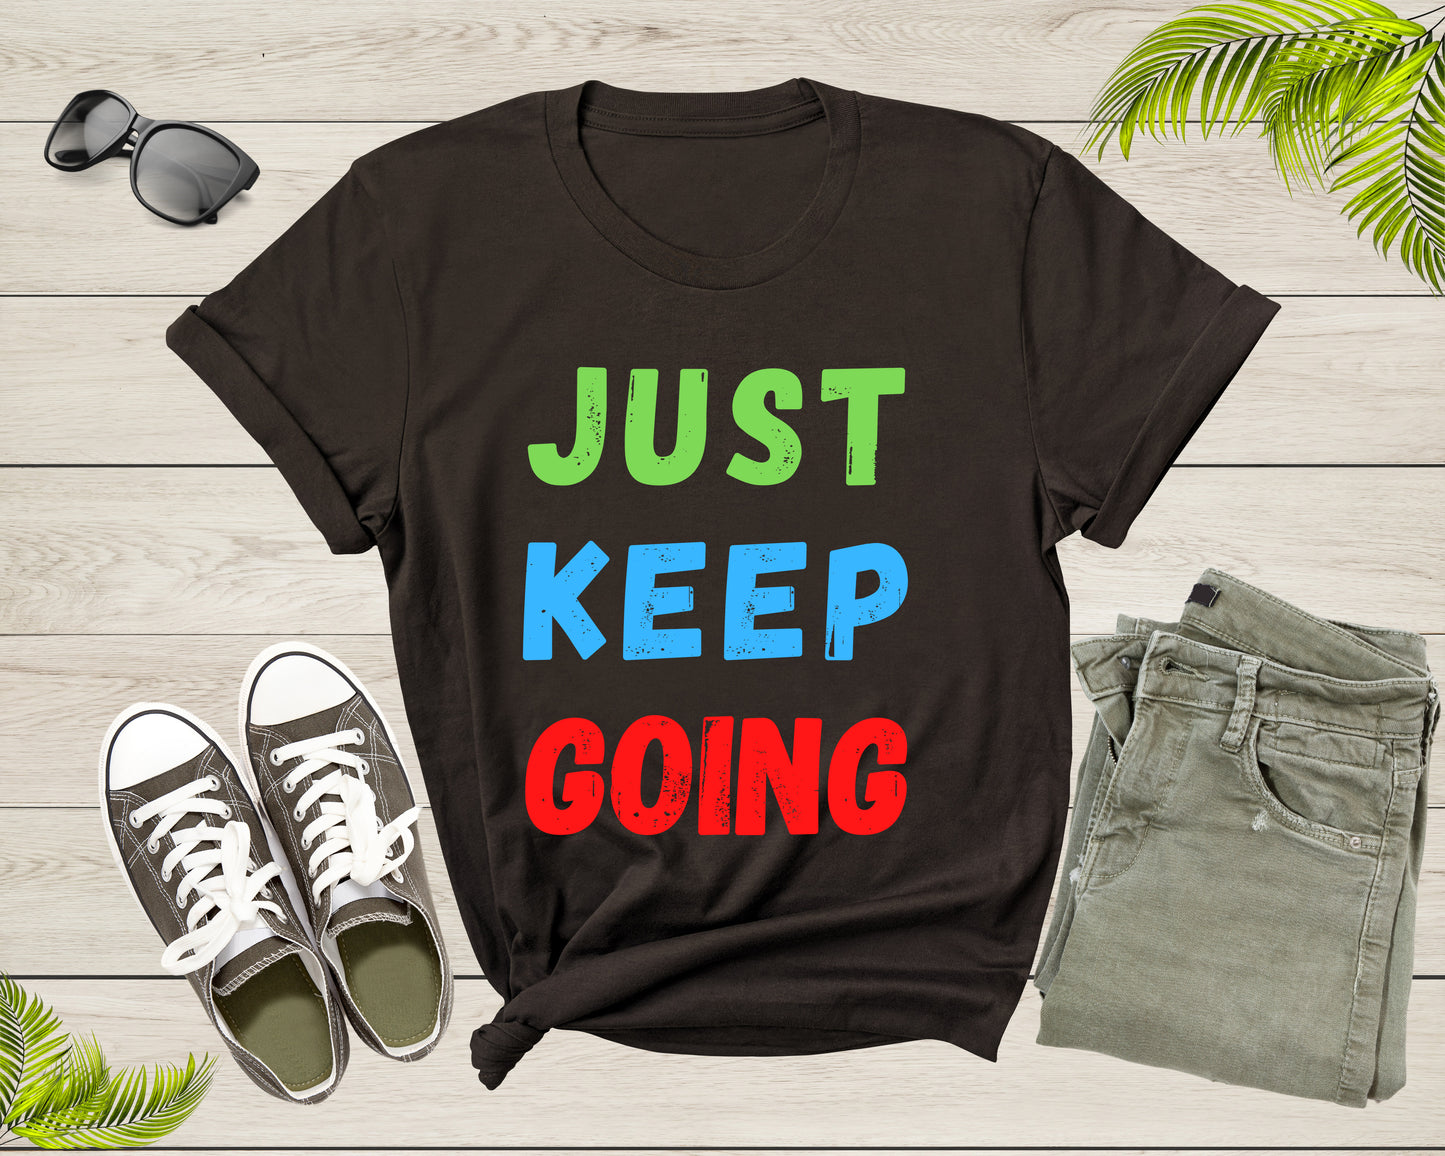 Just Keep Going Colorful Motivational Inspire for Men Women T-Shirt Motivational Quote Gift T Shirt for Teens Kids Boys Girls Tshirt